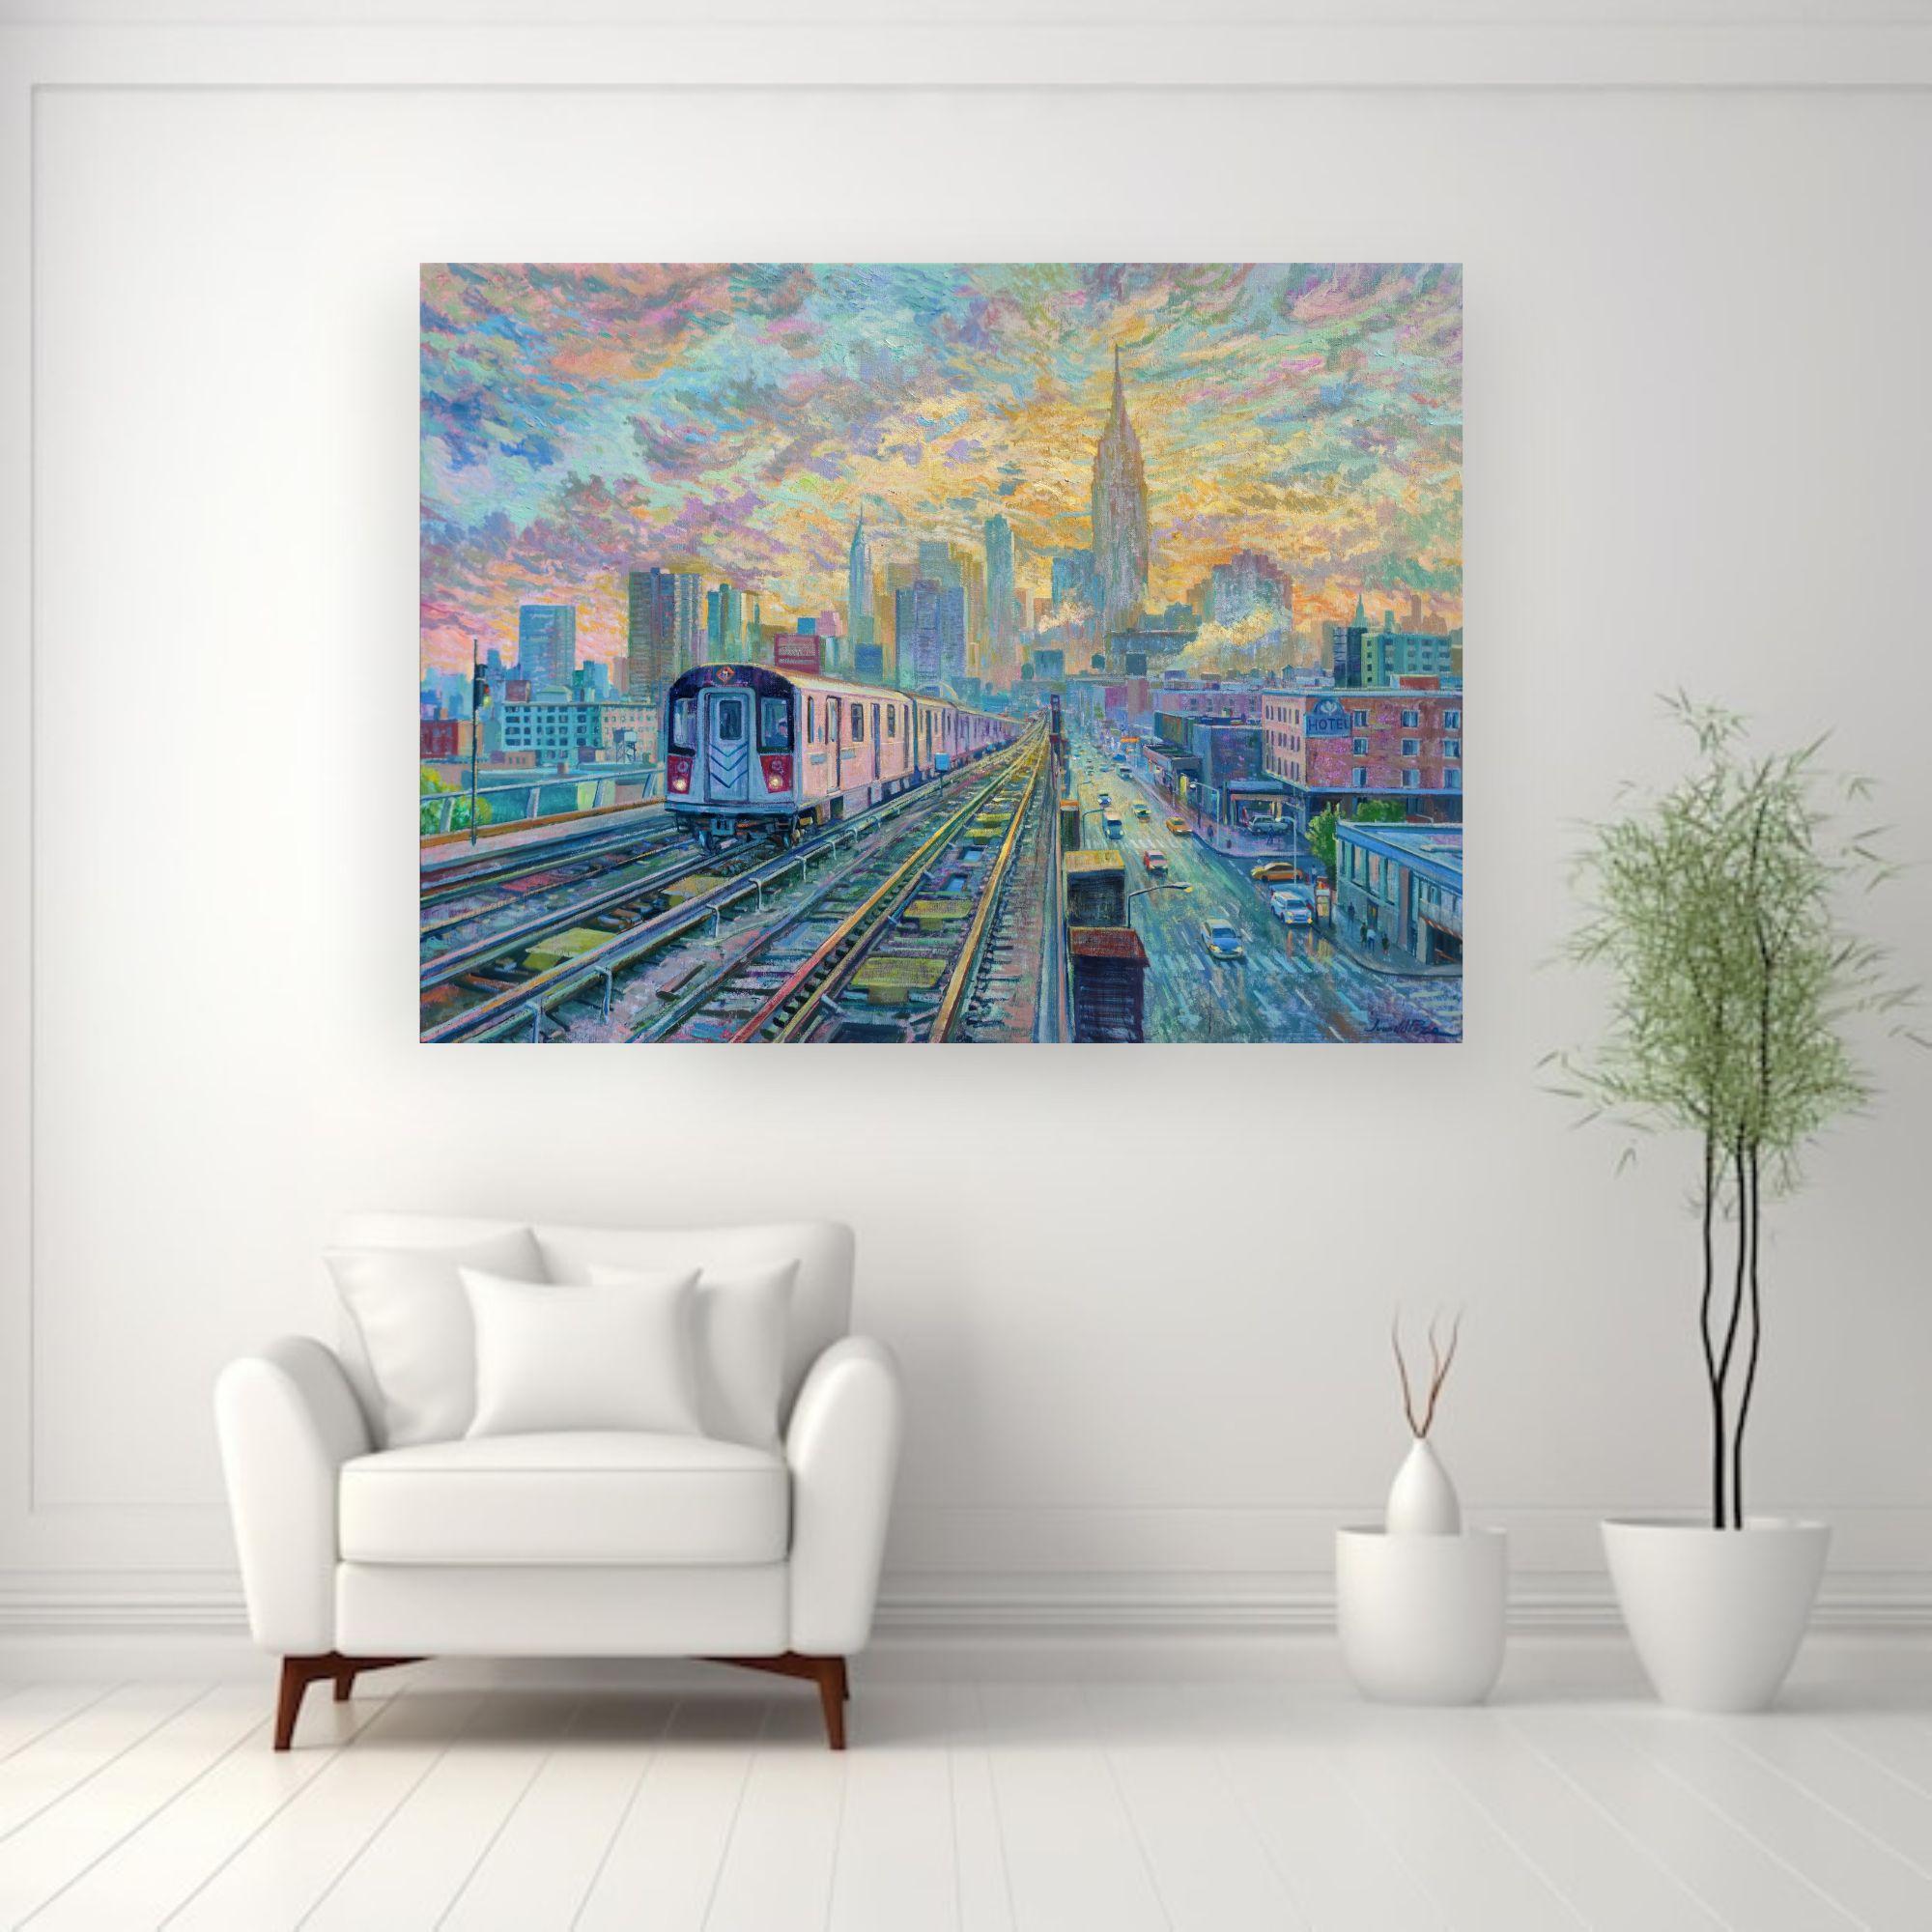 New York Railway -original cityscape impressionism oil painting-contemporary art - Impressionist Painting by Juan del Pozo